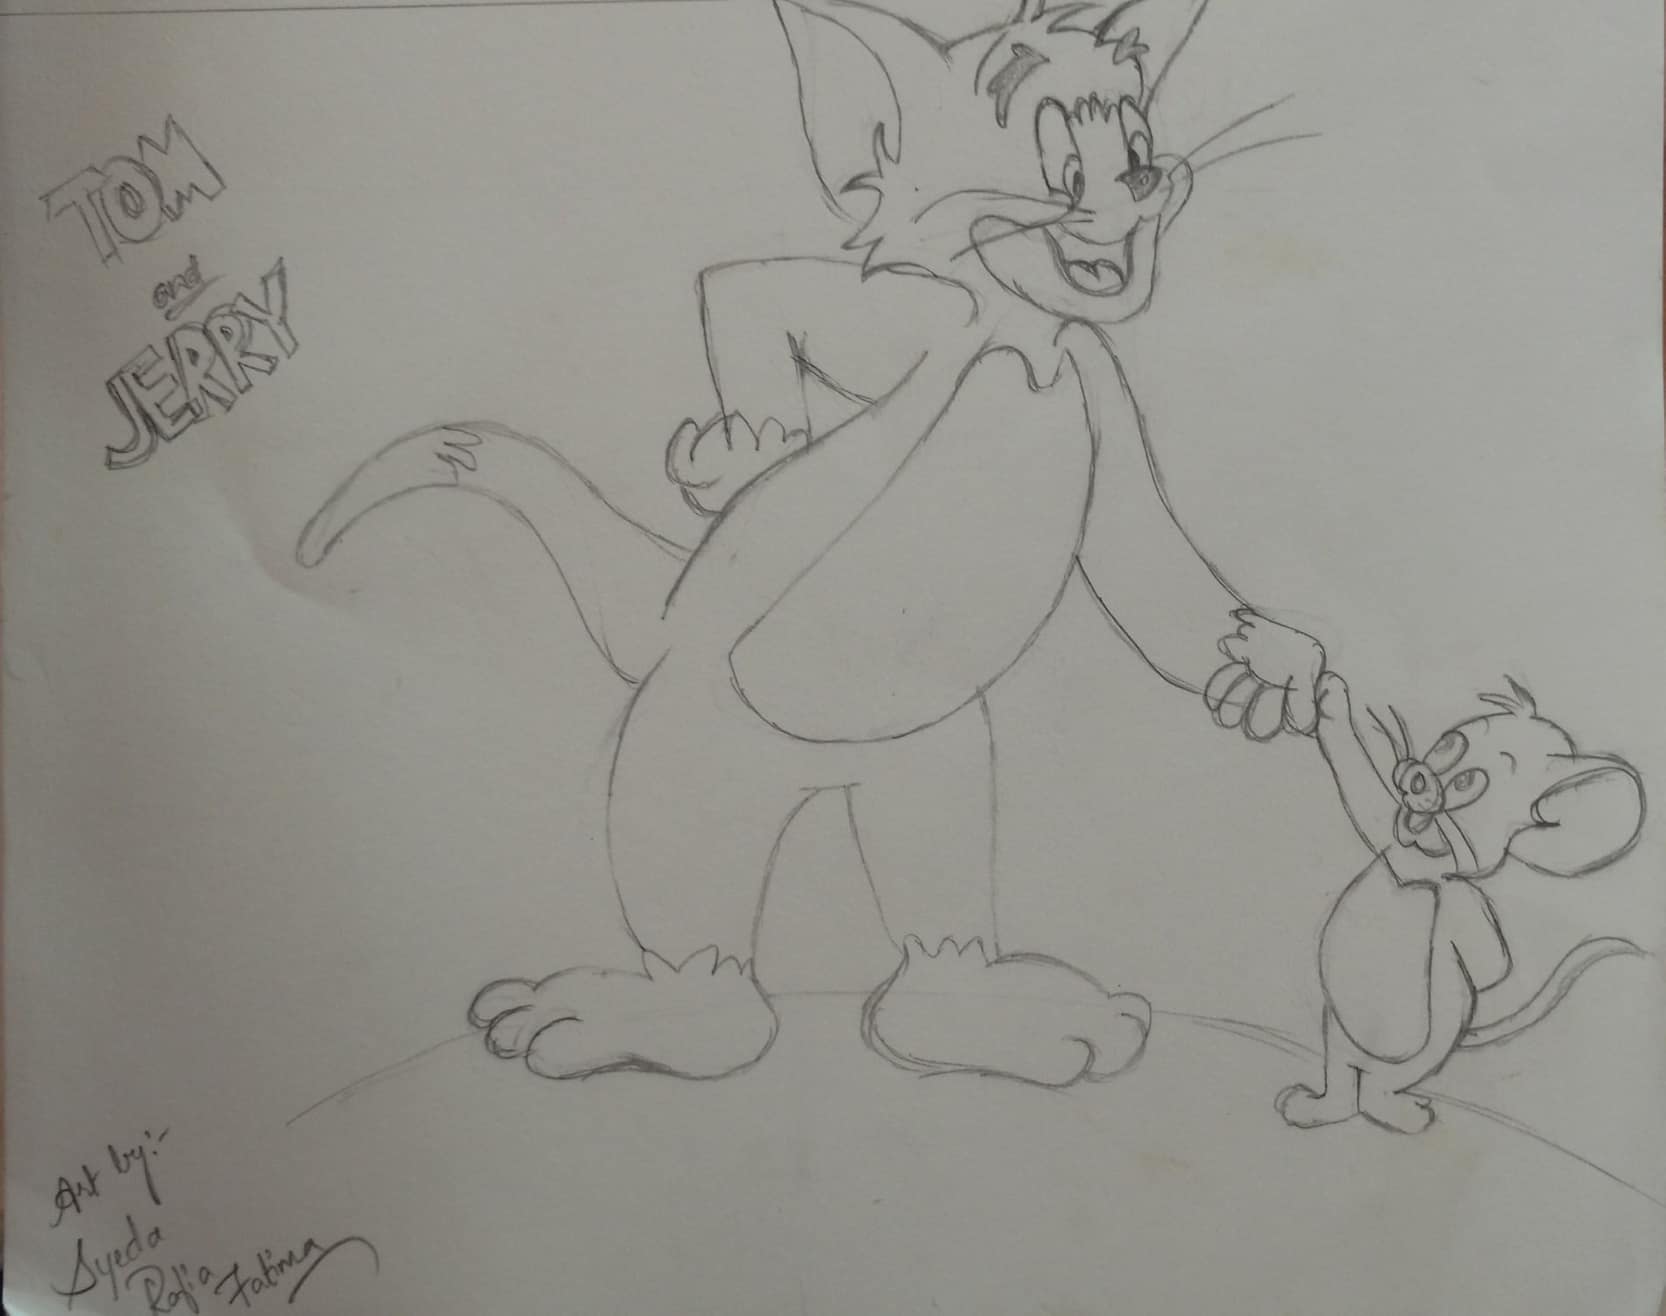 Tom and Jerry Production Drawing - ID: maytomjerry17399 | Van Eaton  Galleries